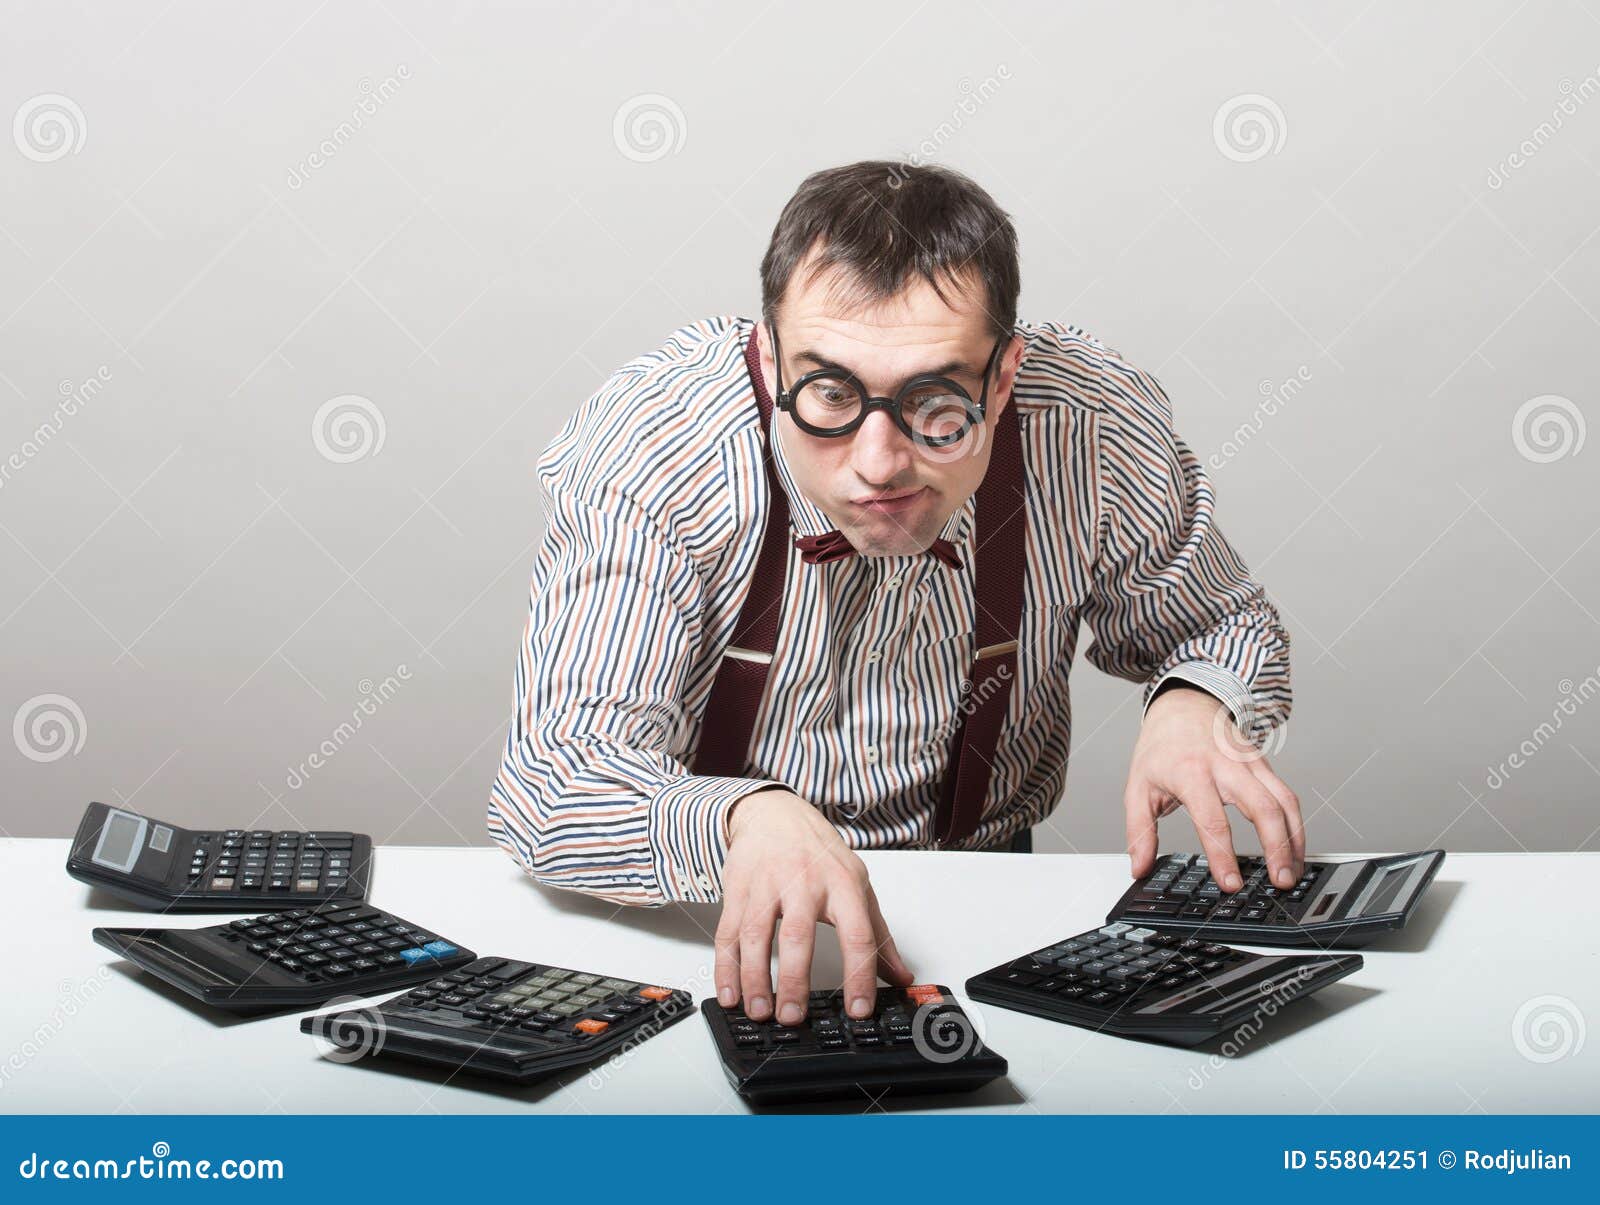 Funny accountant stock image. Image of button, funny - 55804251